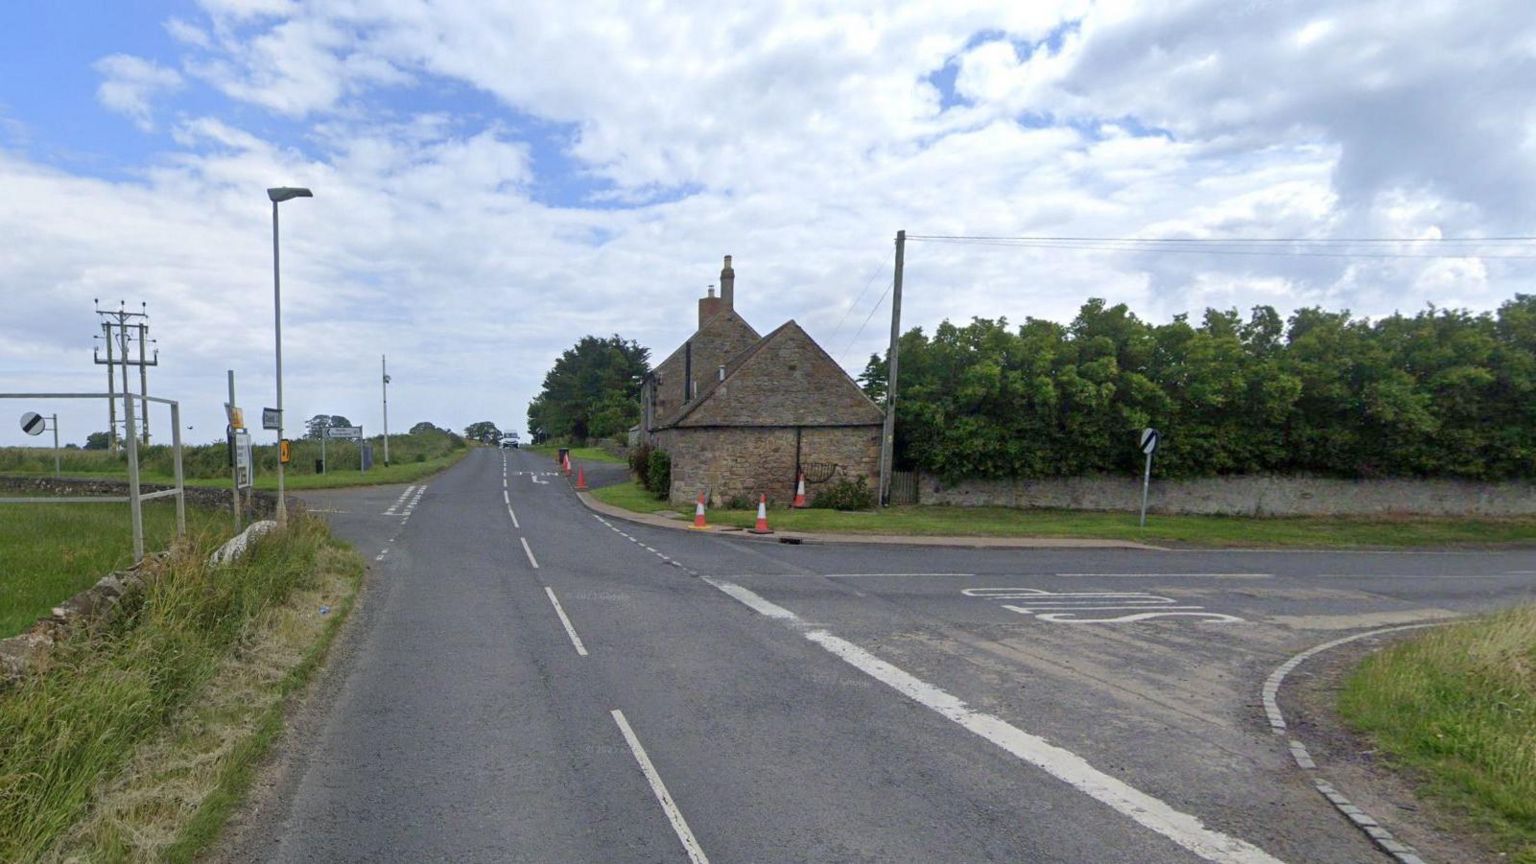 The road junction